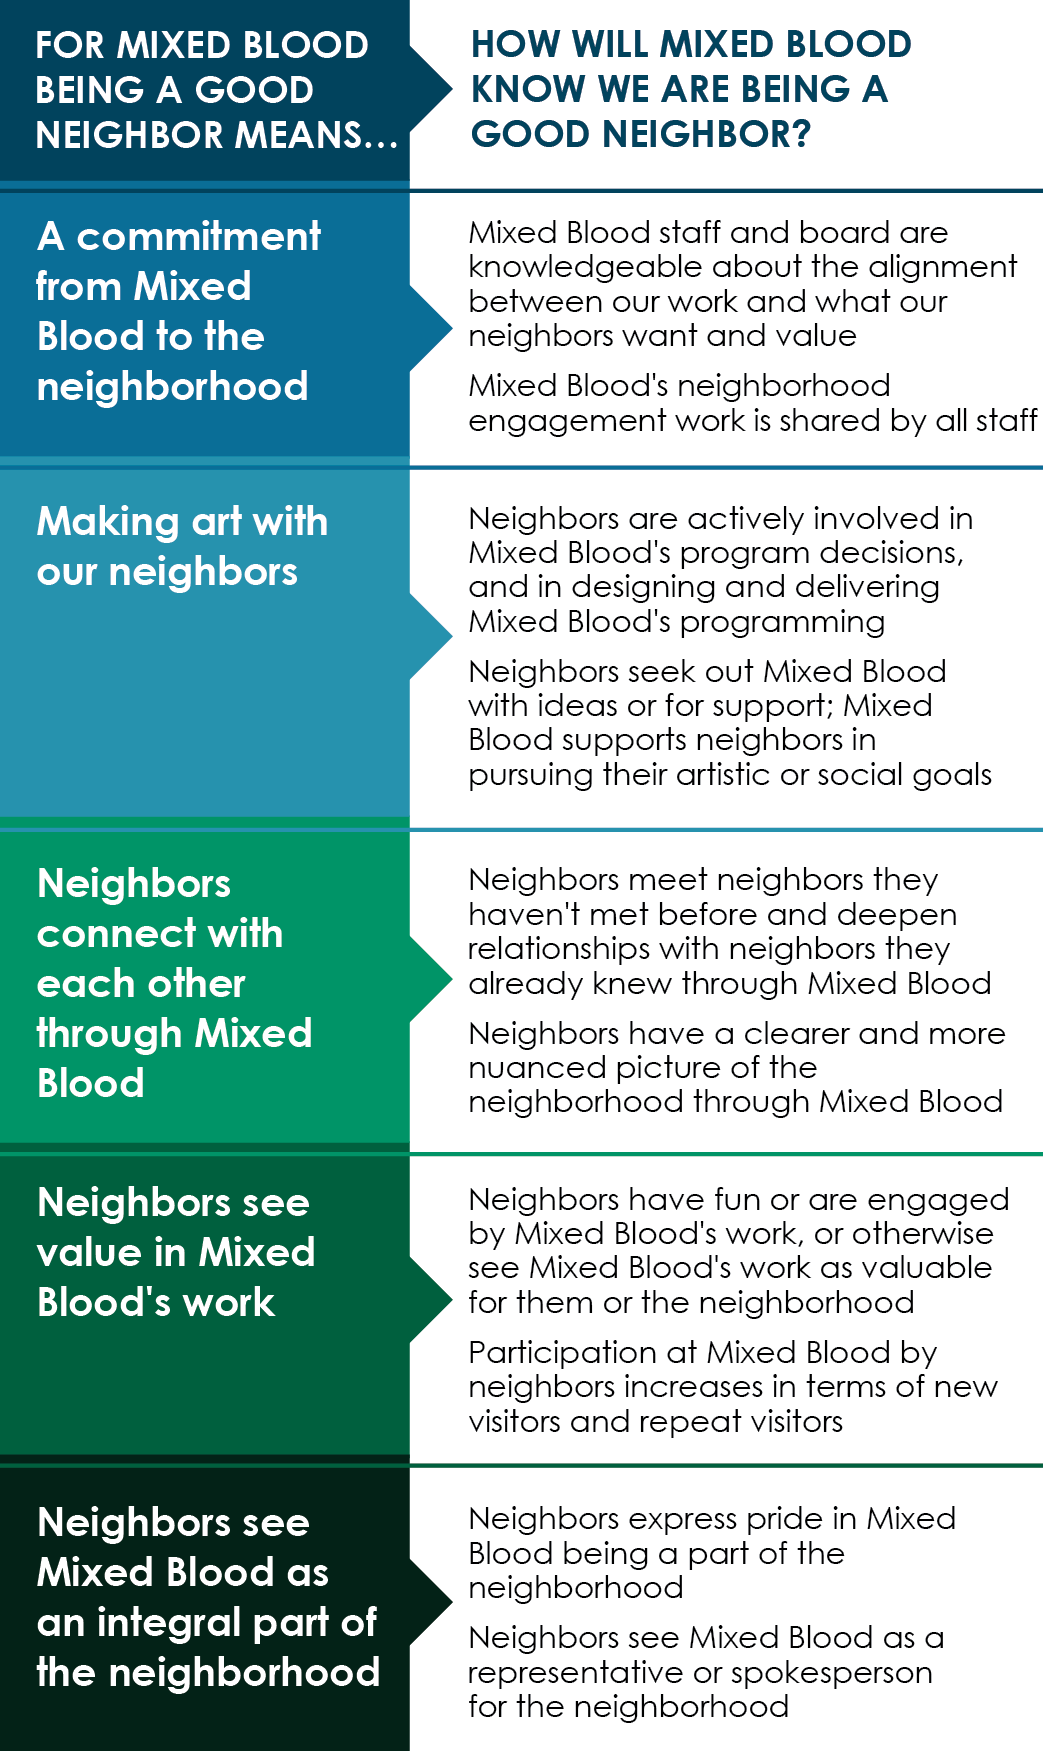 This table displays five ways that Mixed Blood defines being a good neighbor and how they will know if they are succeeding.